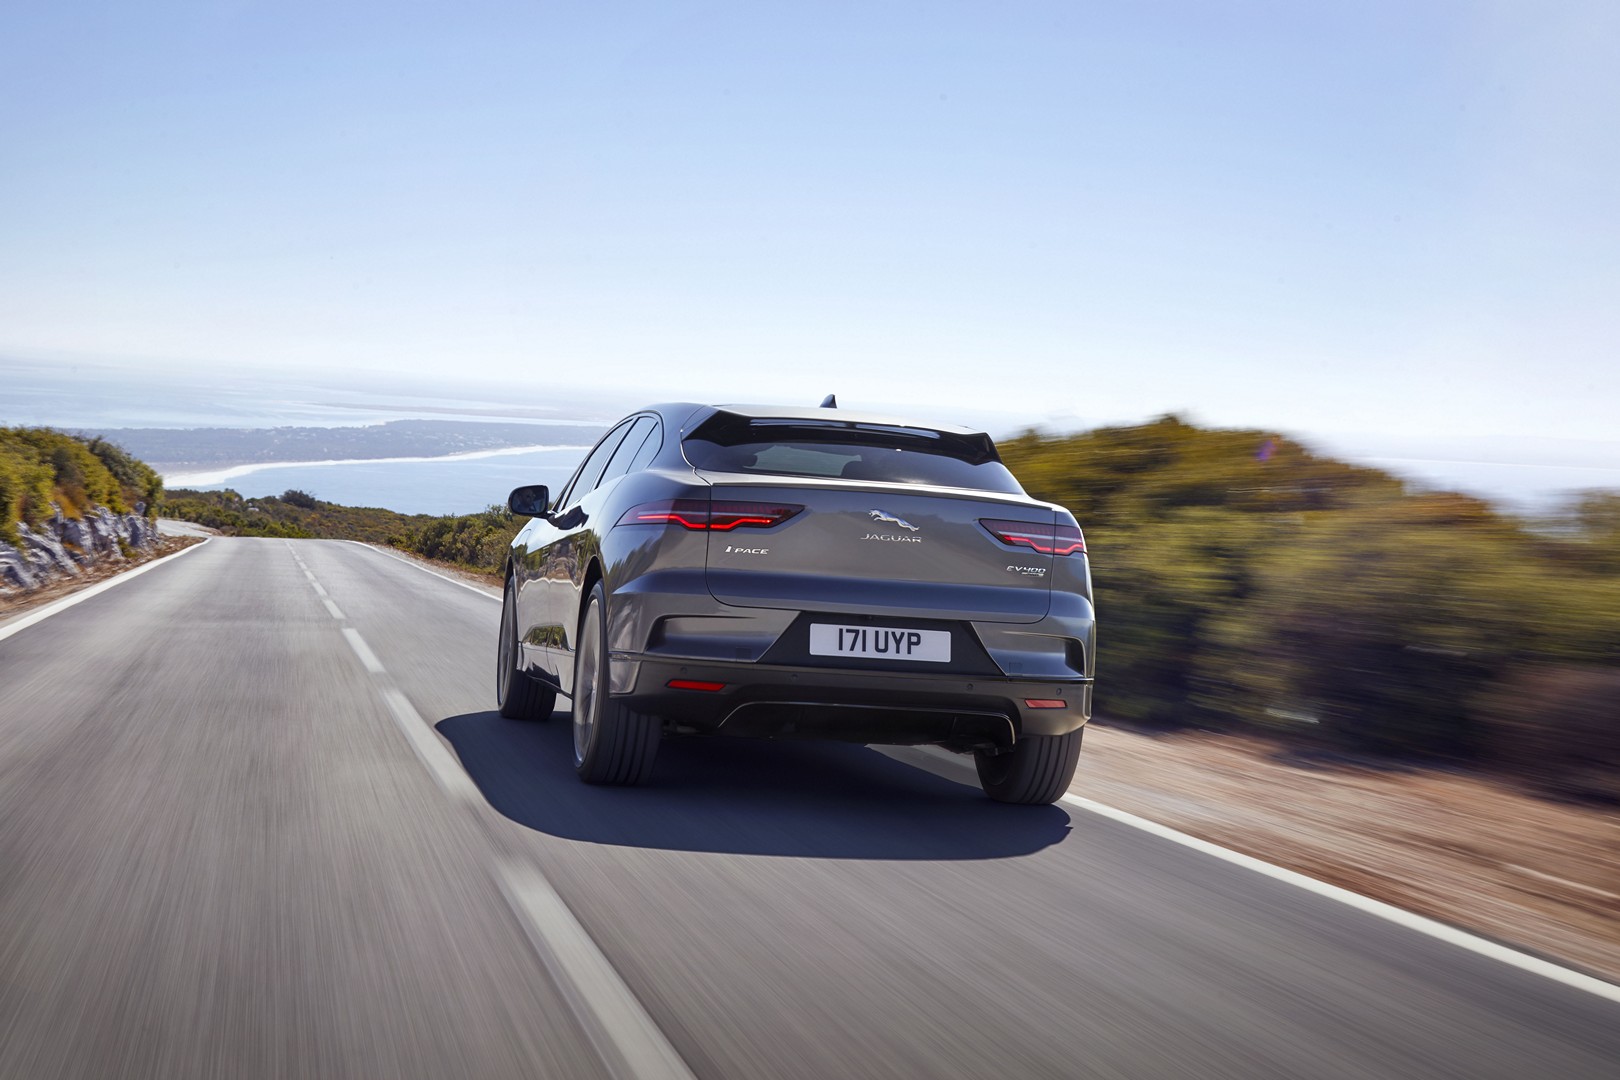 https://s1.cdn.autoevolution.com/images/news/gallery/2020-jaguar-i-pace-update-offers-234-miles-of-range-thanks-to-etrophy-know-how_63.jpg